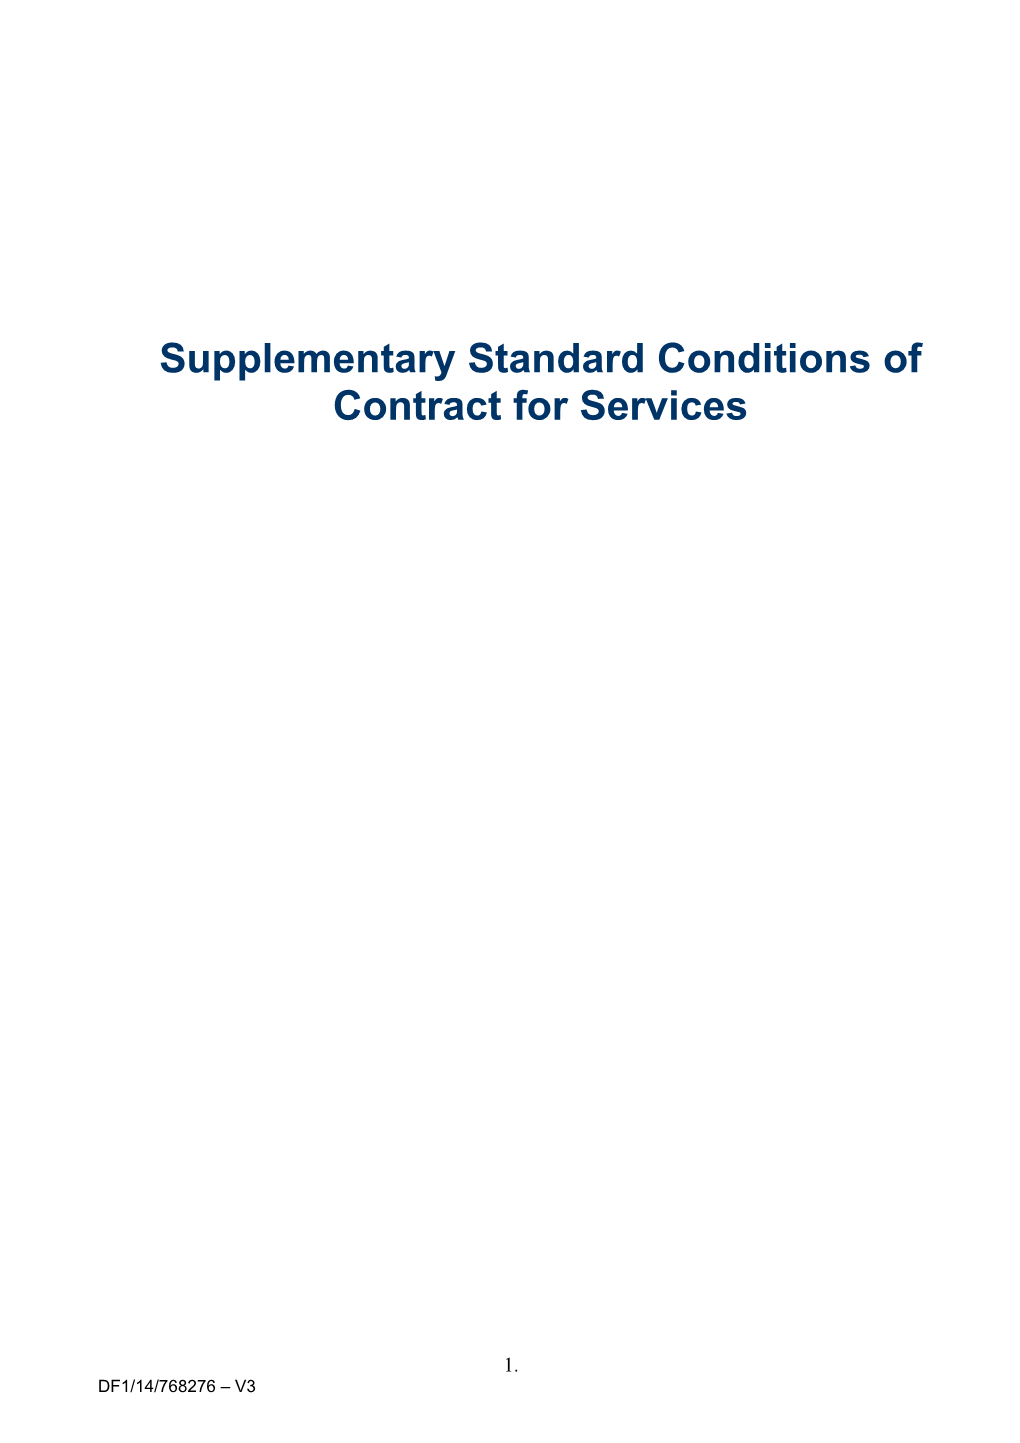 Supplementary Standard Conditions of Contract for Services